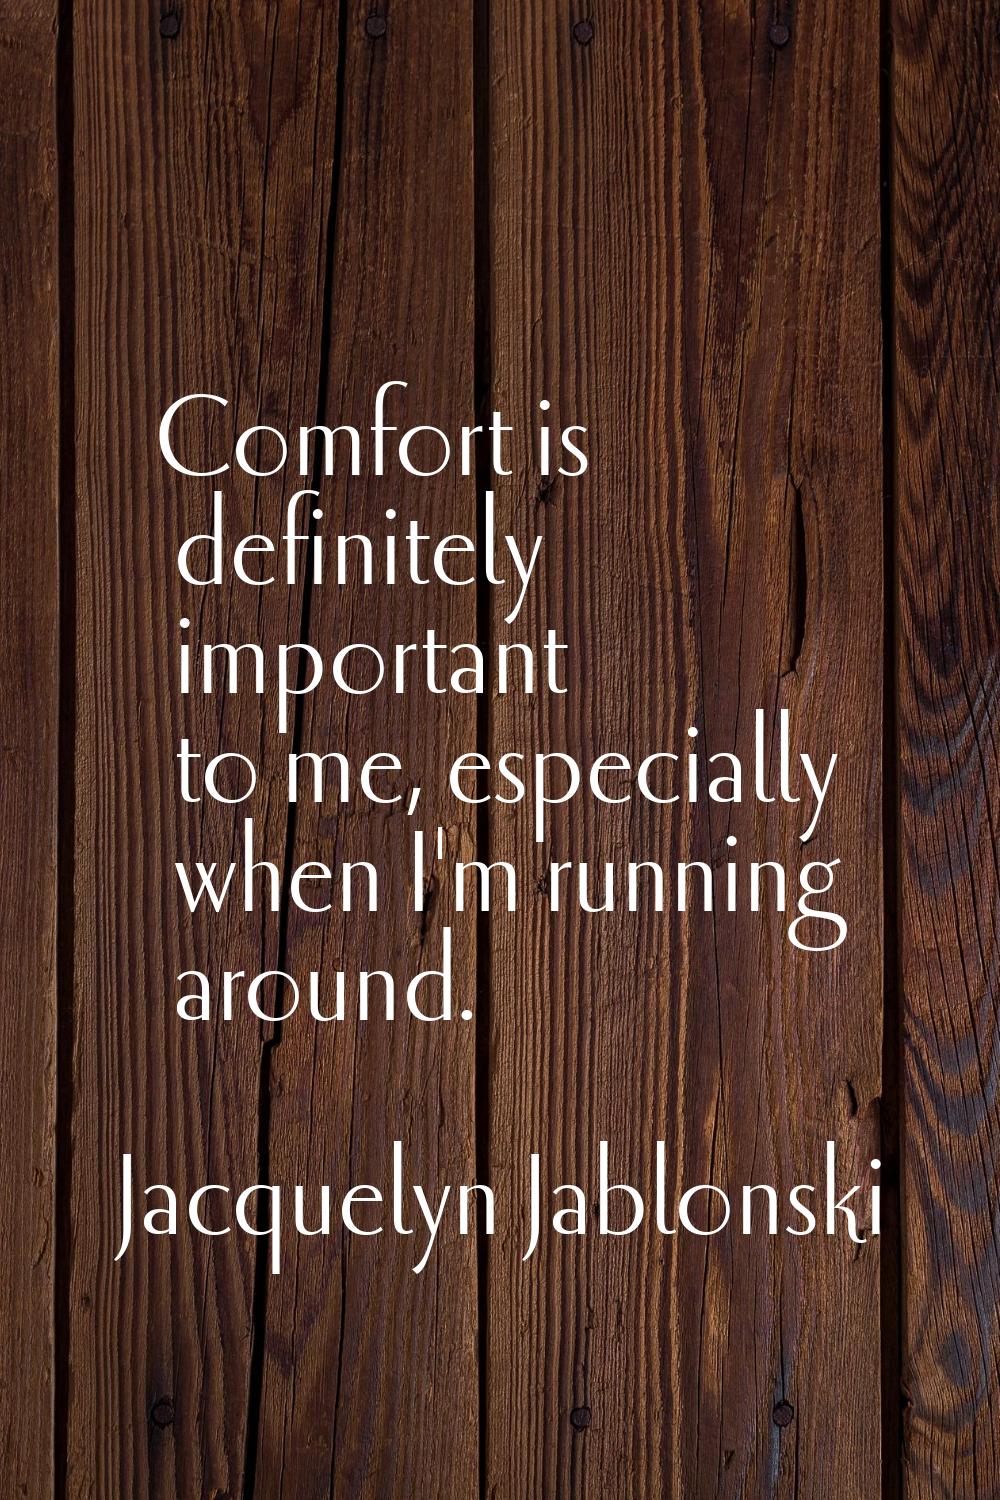 Comfort is definitely important to me, especially when I'm running around.